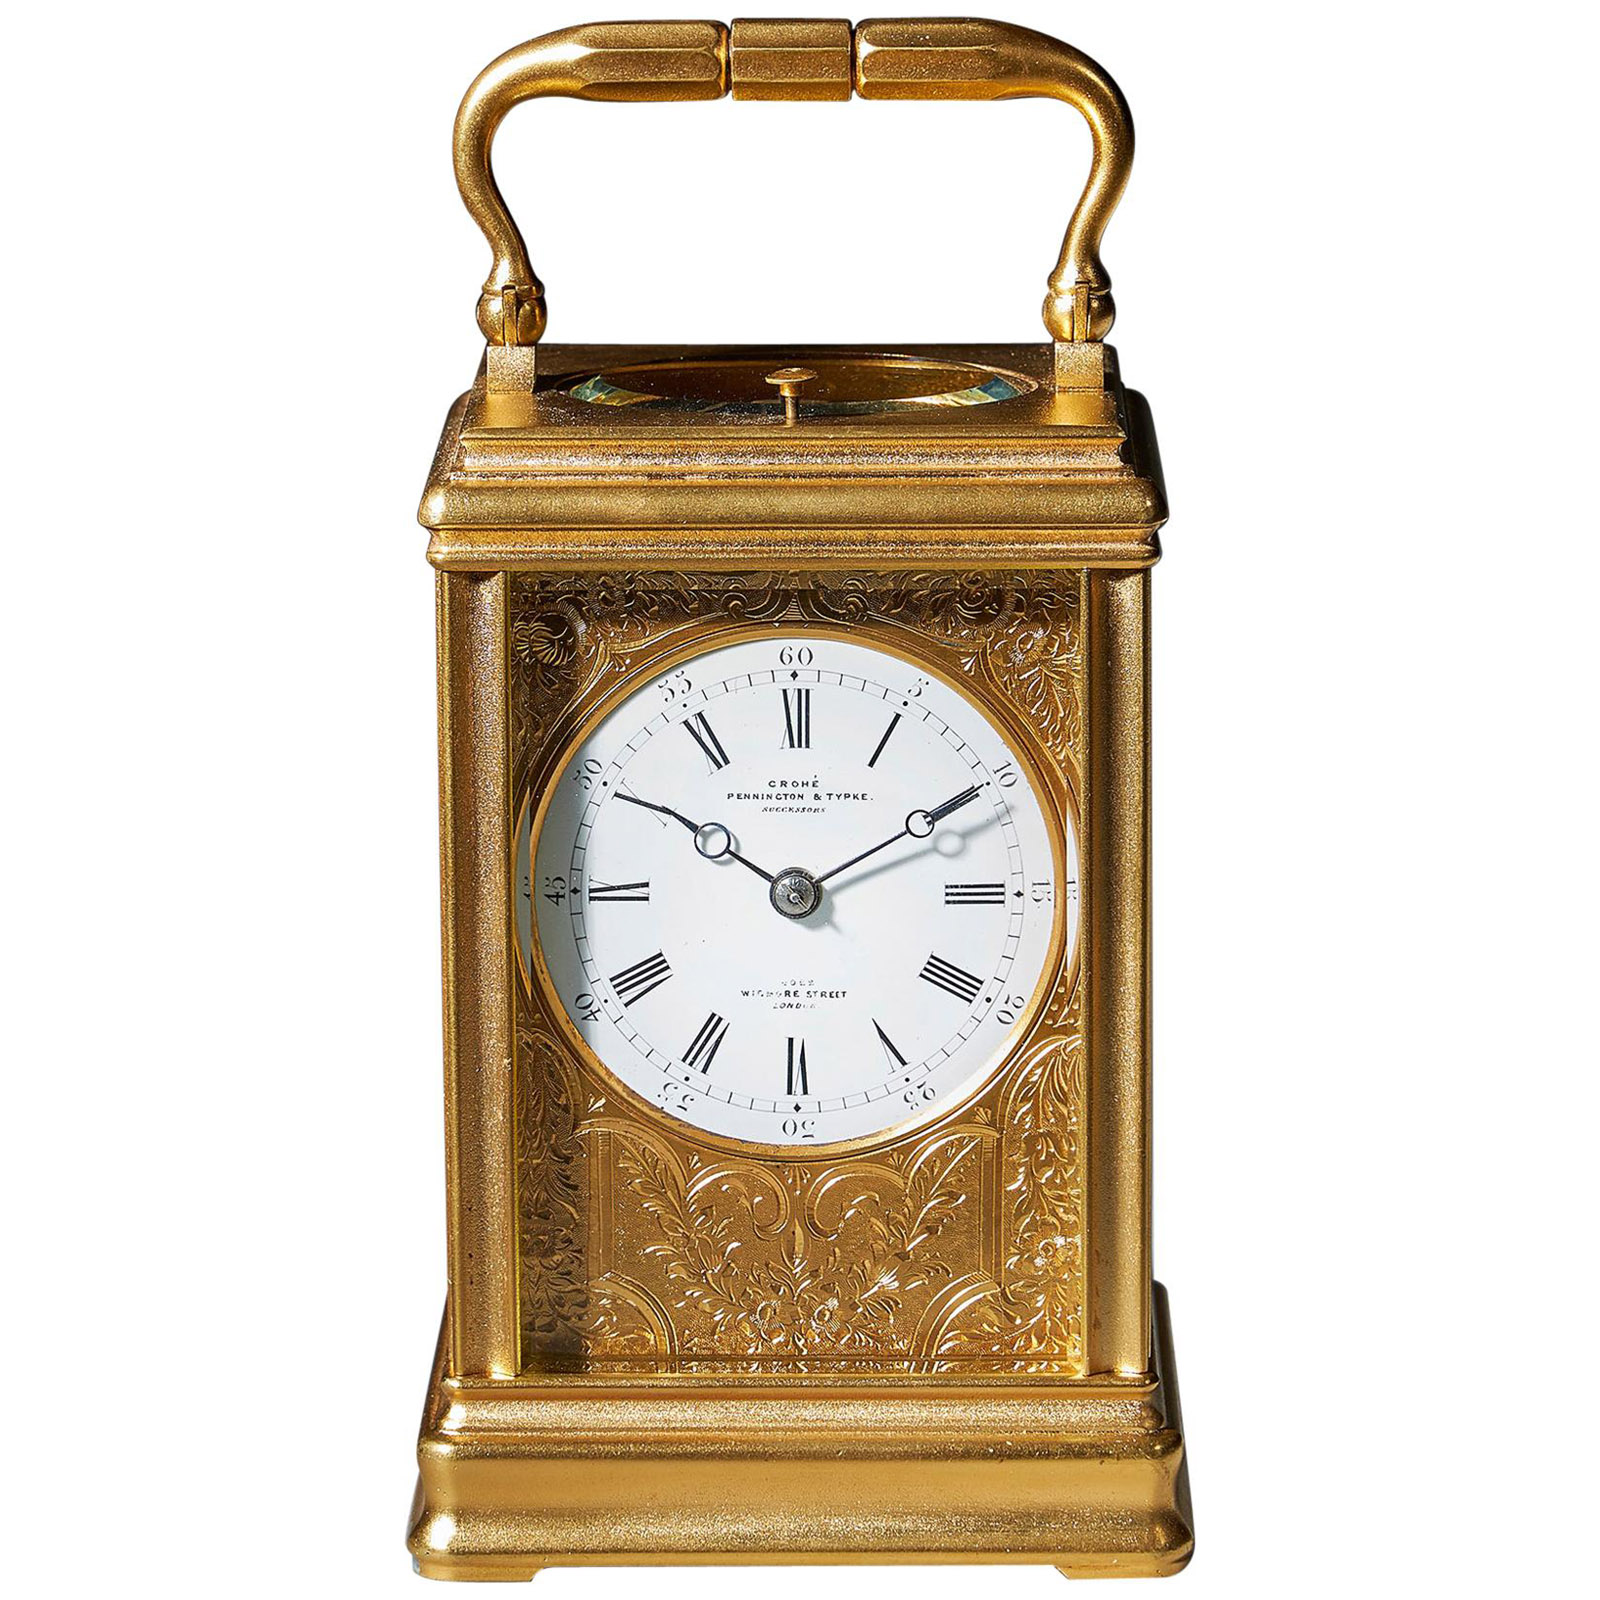 Repeating Gilt-Brass Carriage Clock by the Famous Drocourt